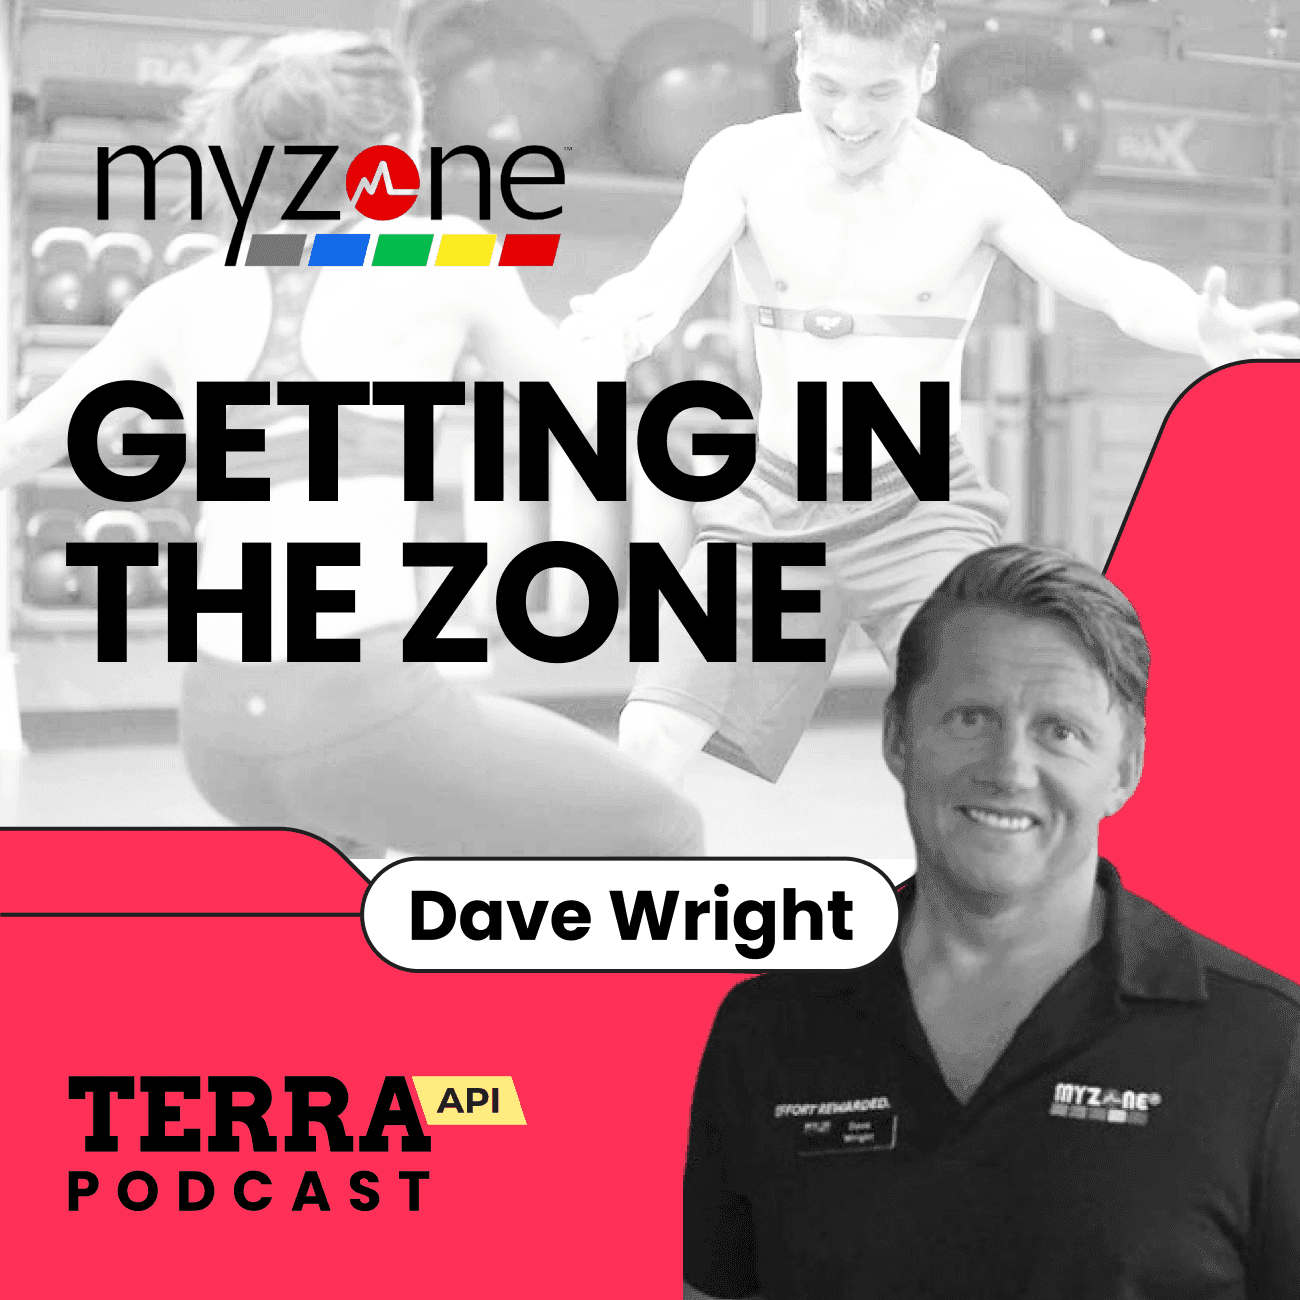 Founder of MyZone - Dave Wright 